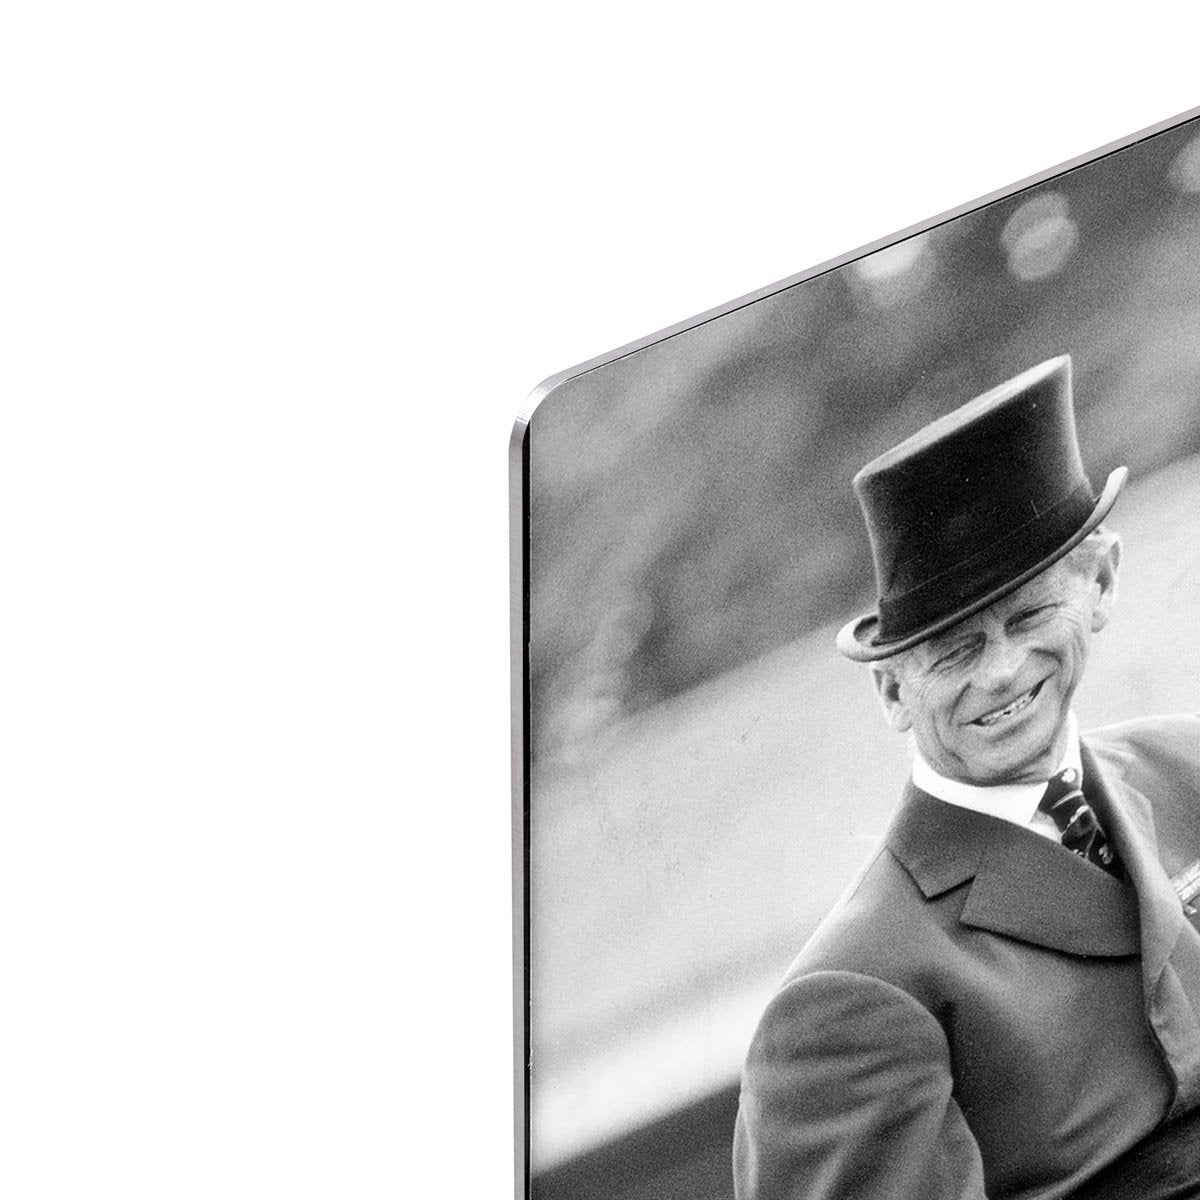 Prince Philip driving a carriage during a race at Ascot HD Metal Print